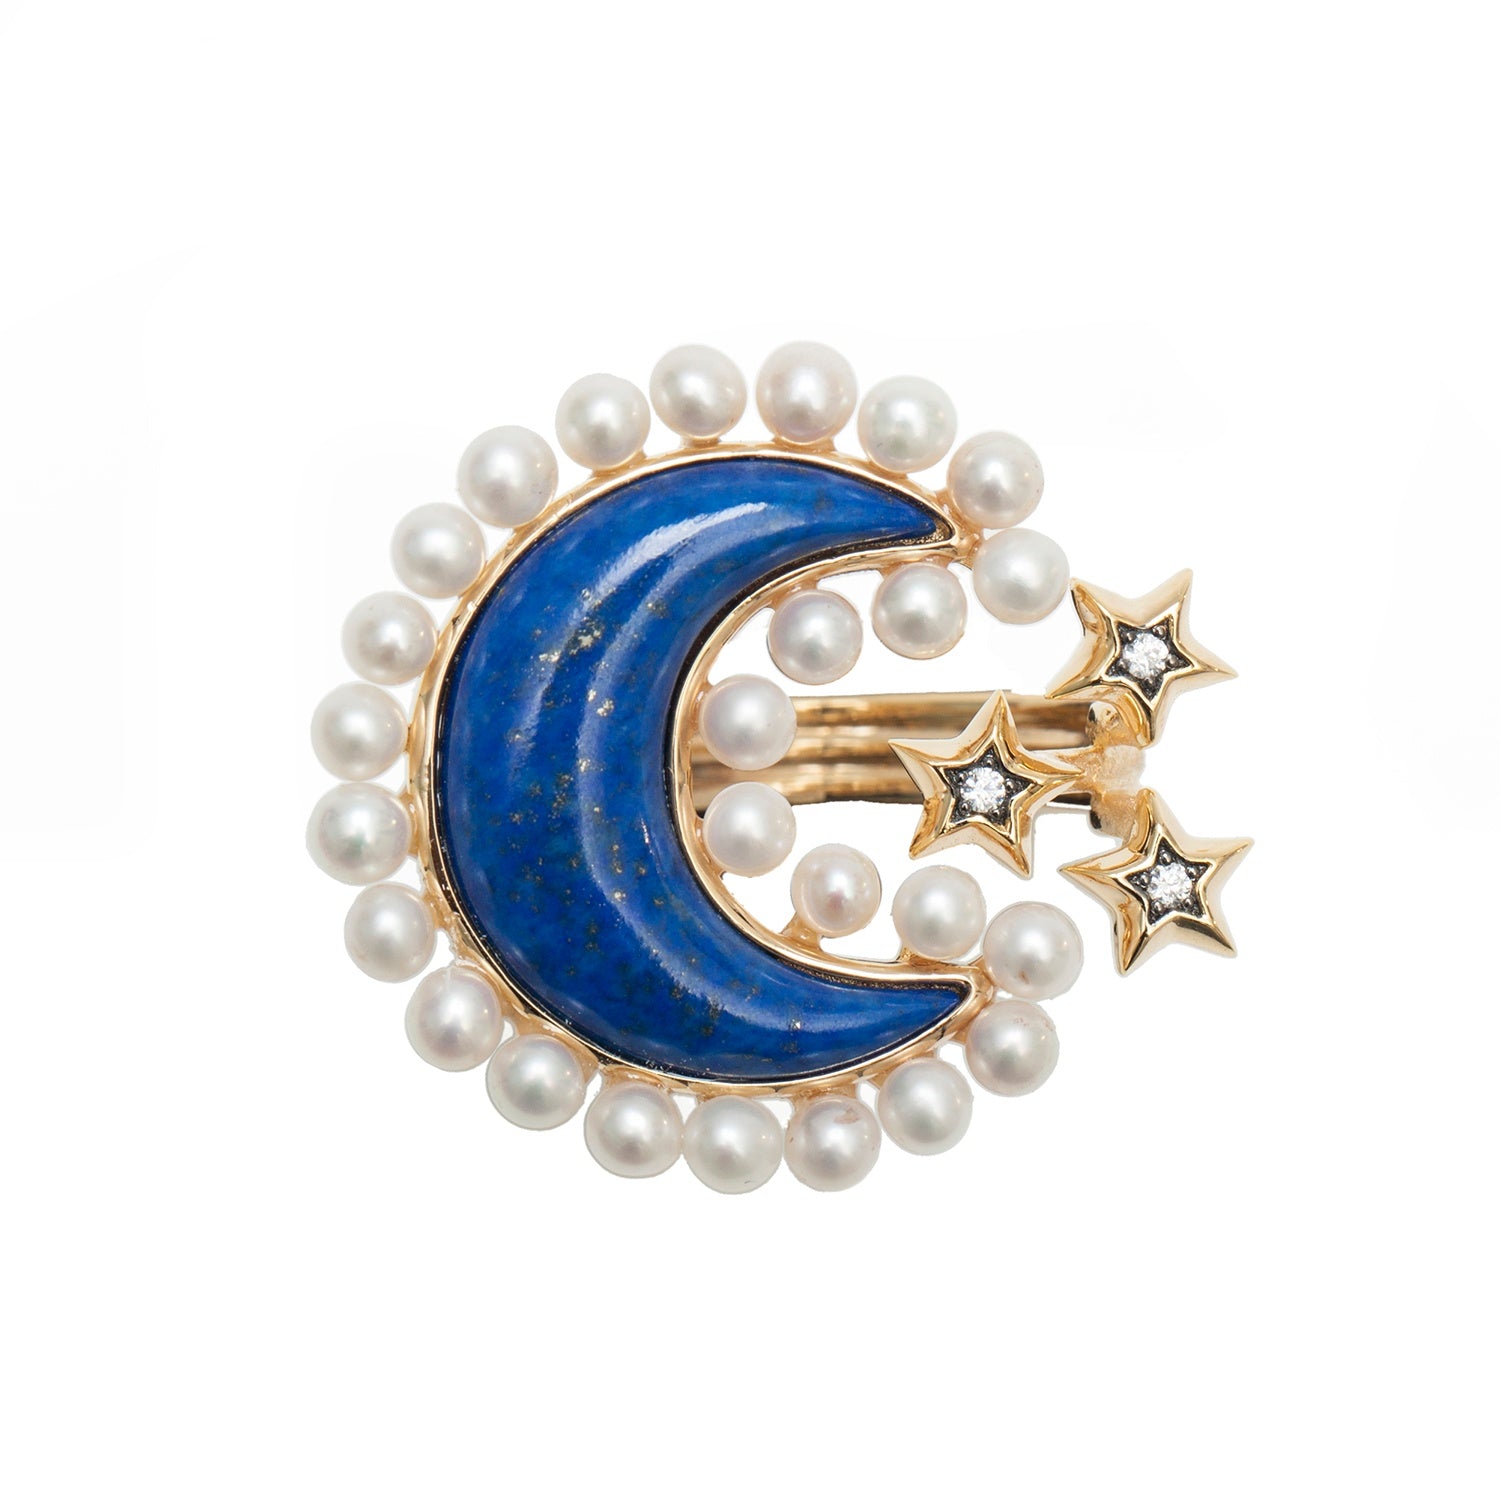 Pearls And Lapis Lazuli Moon Ring In Vermeil Gold - 6